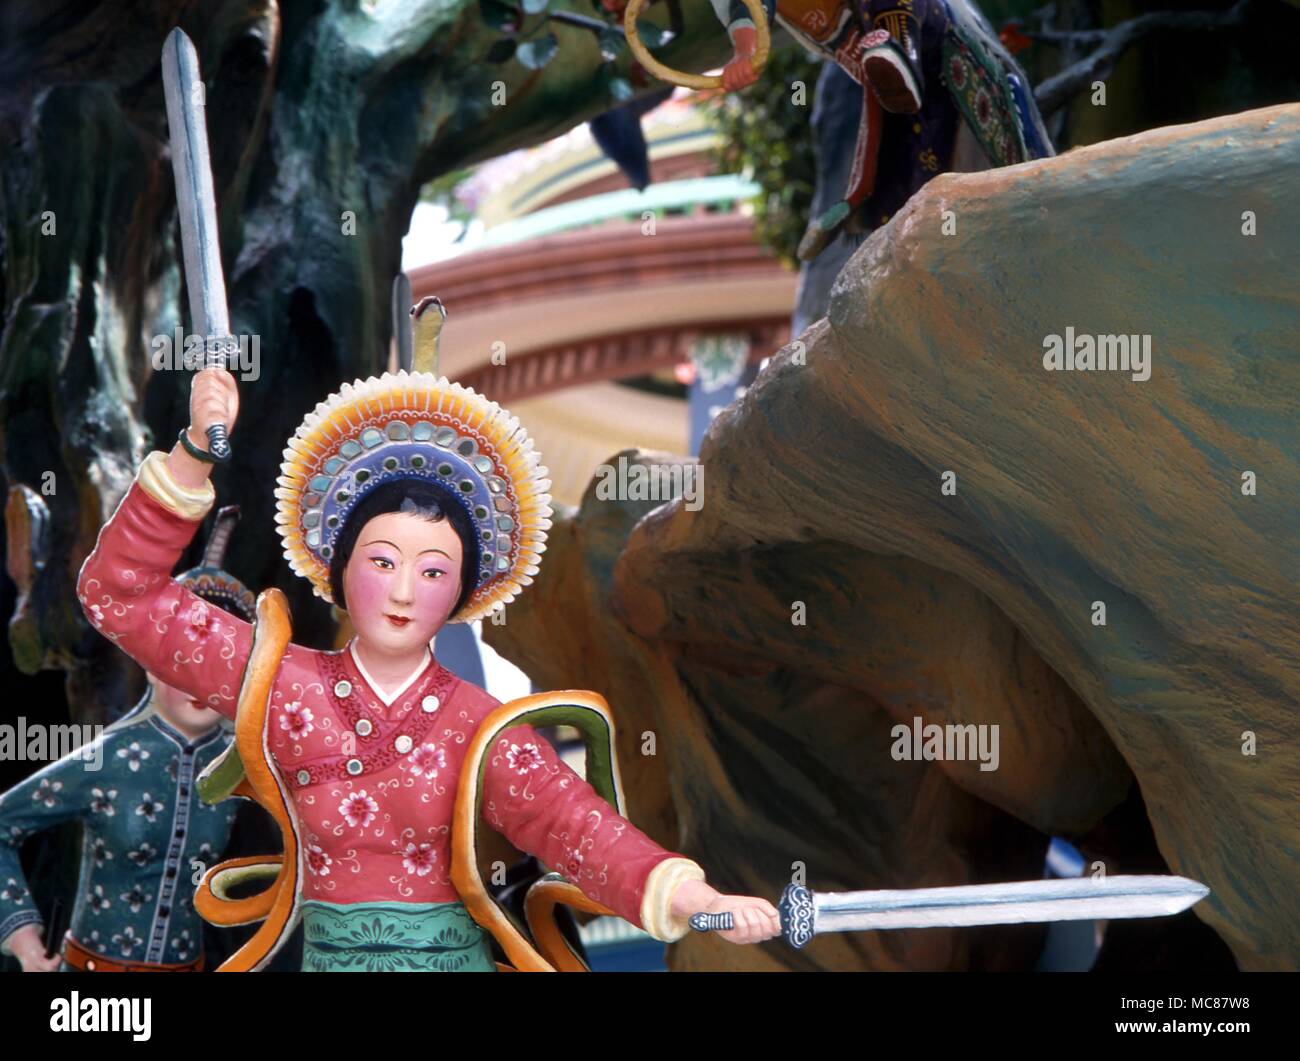 Chinese Mythology Scene from the story of Lady White Snake from the life size statuary groups in Haw Par Villa Singapore Stock Photo